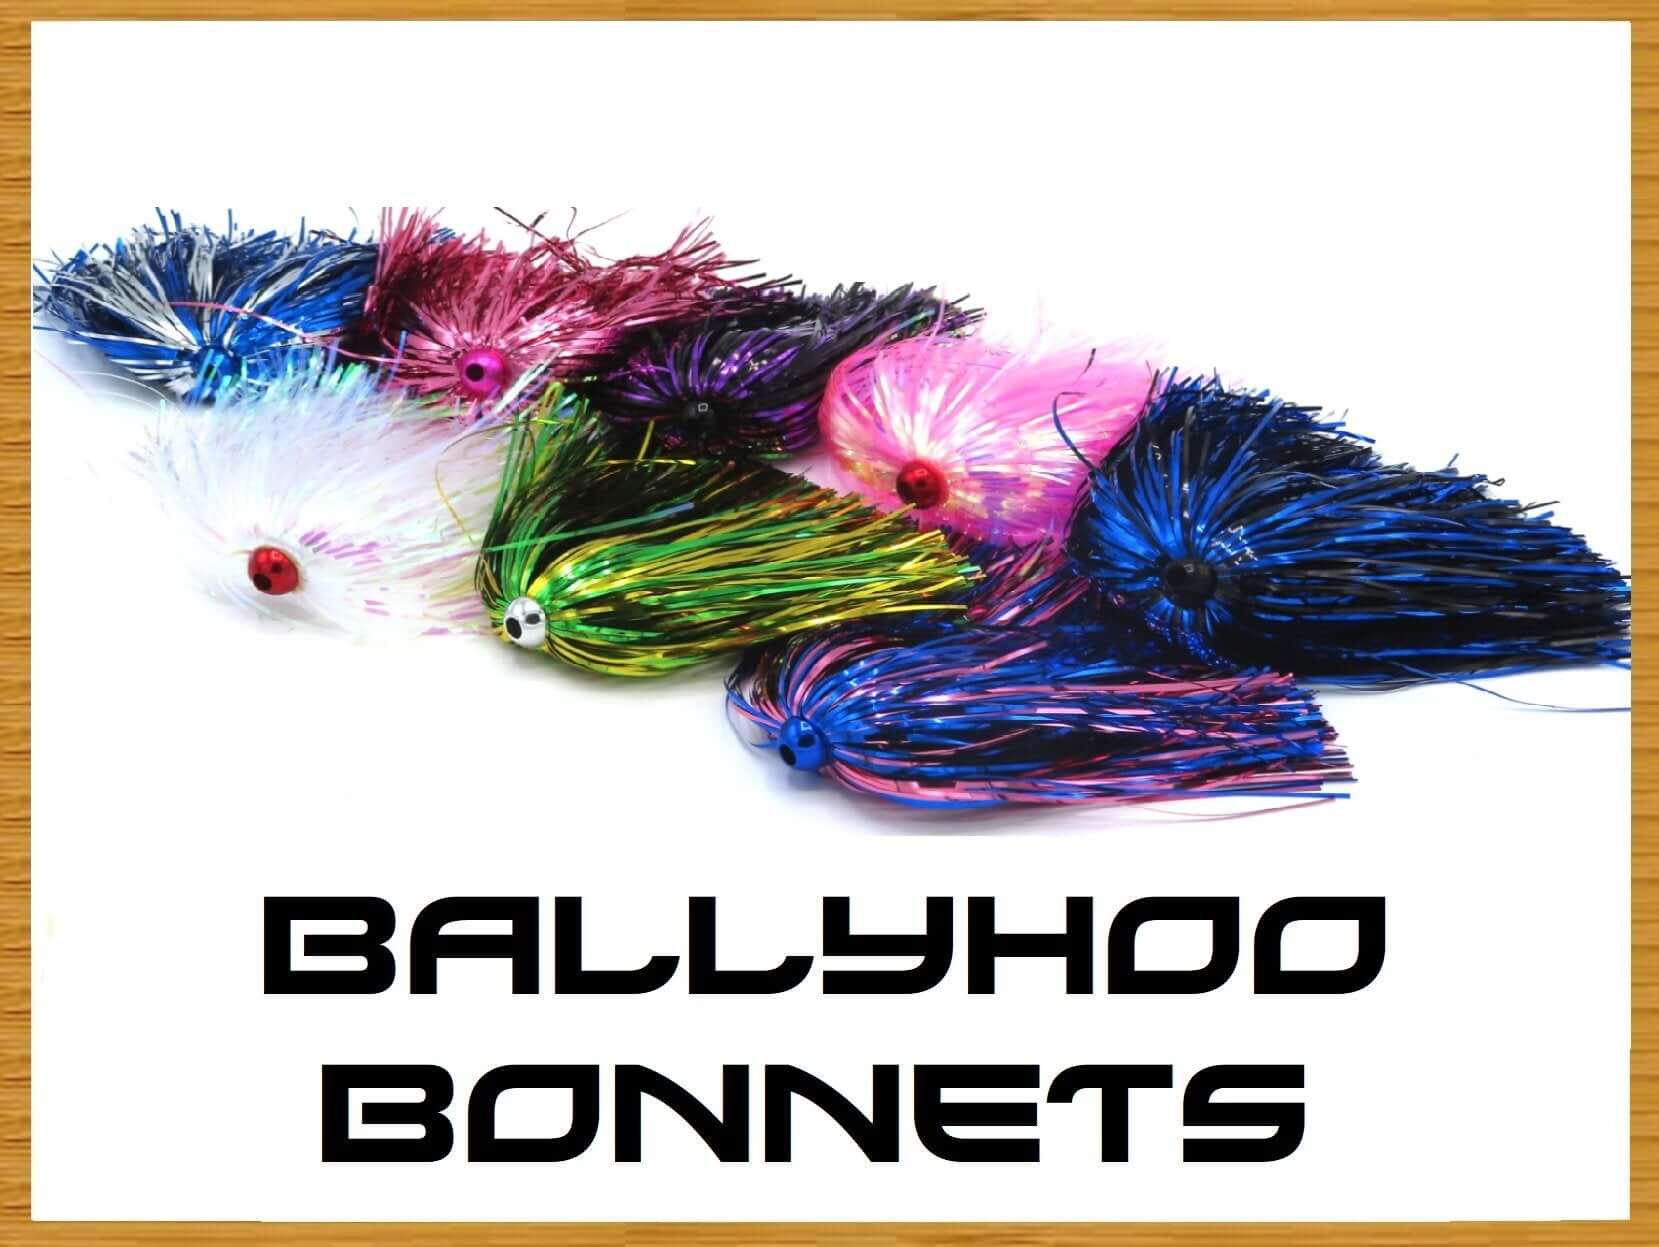 Products – The BallyHoop